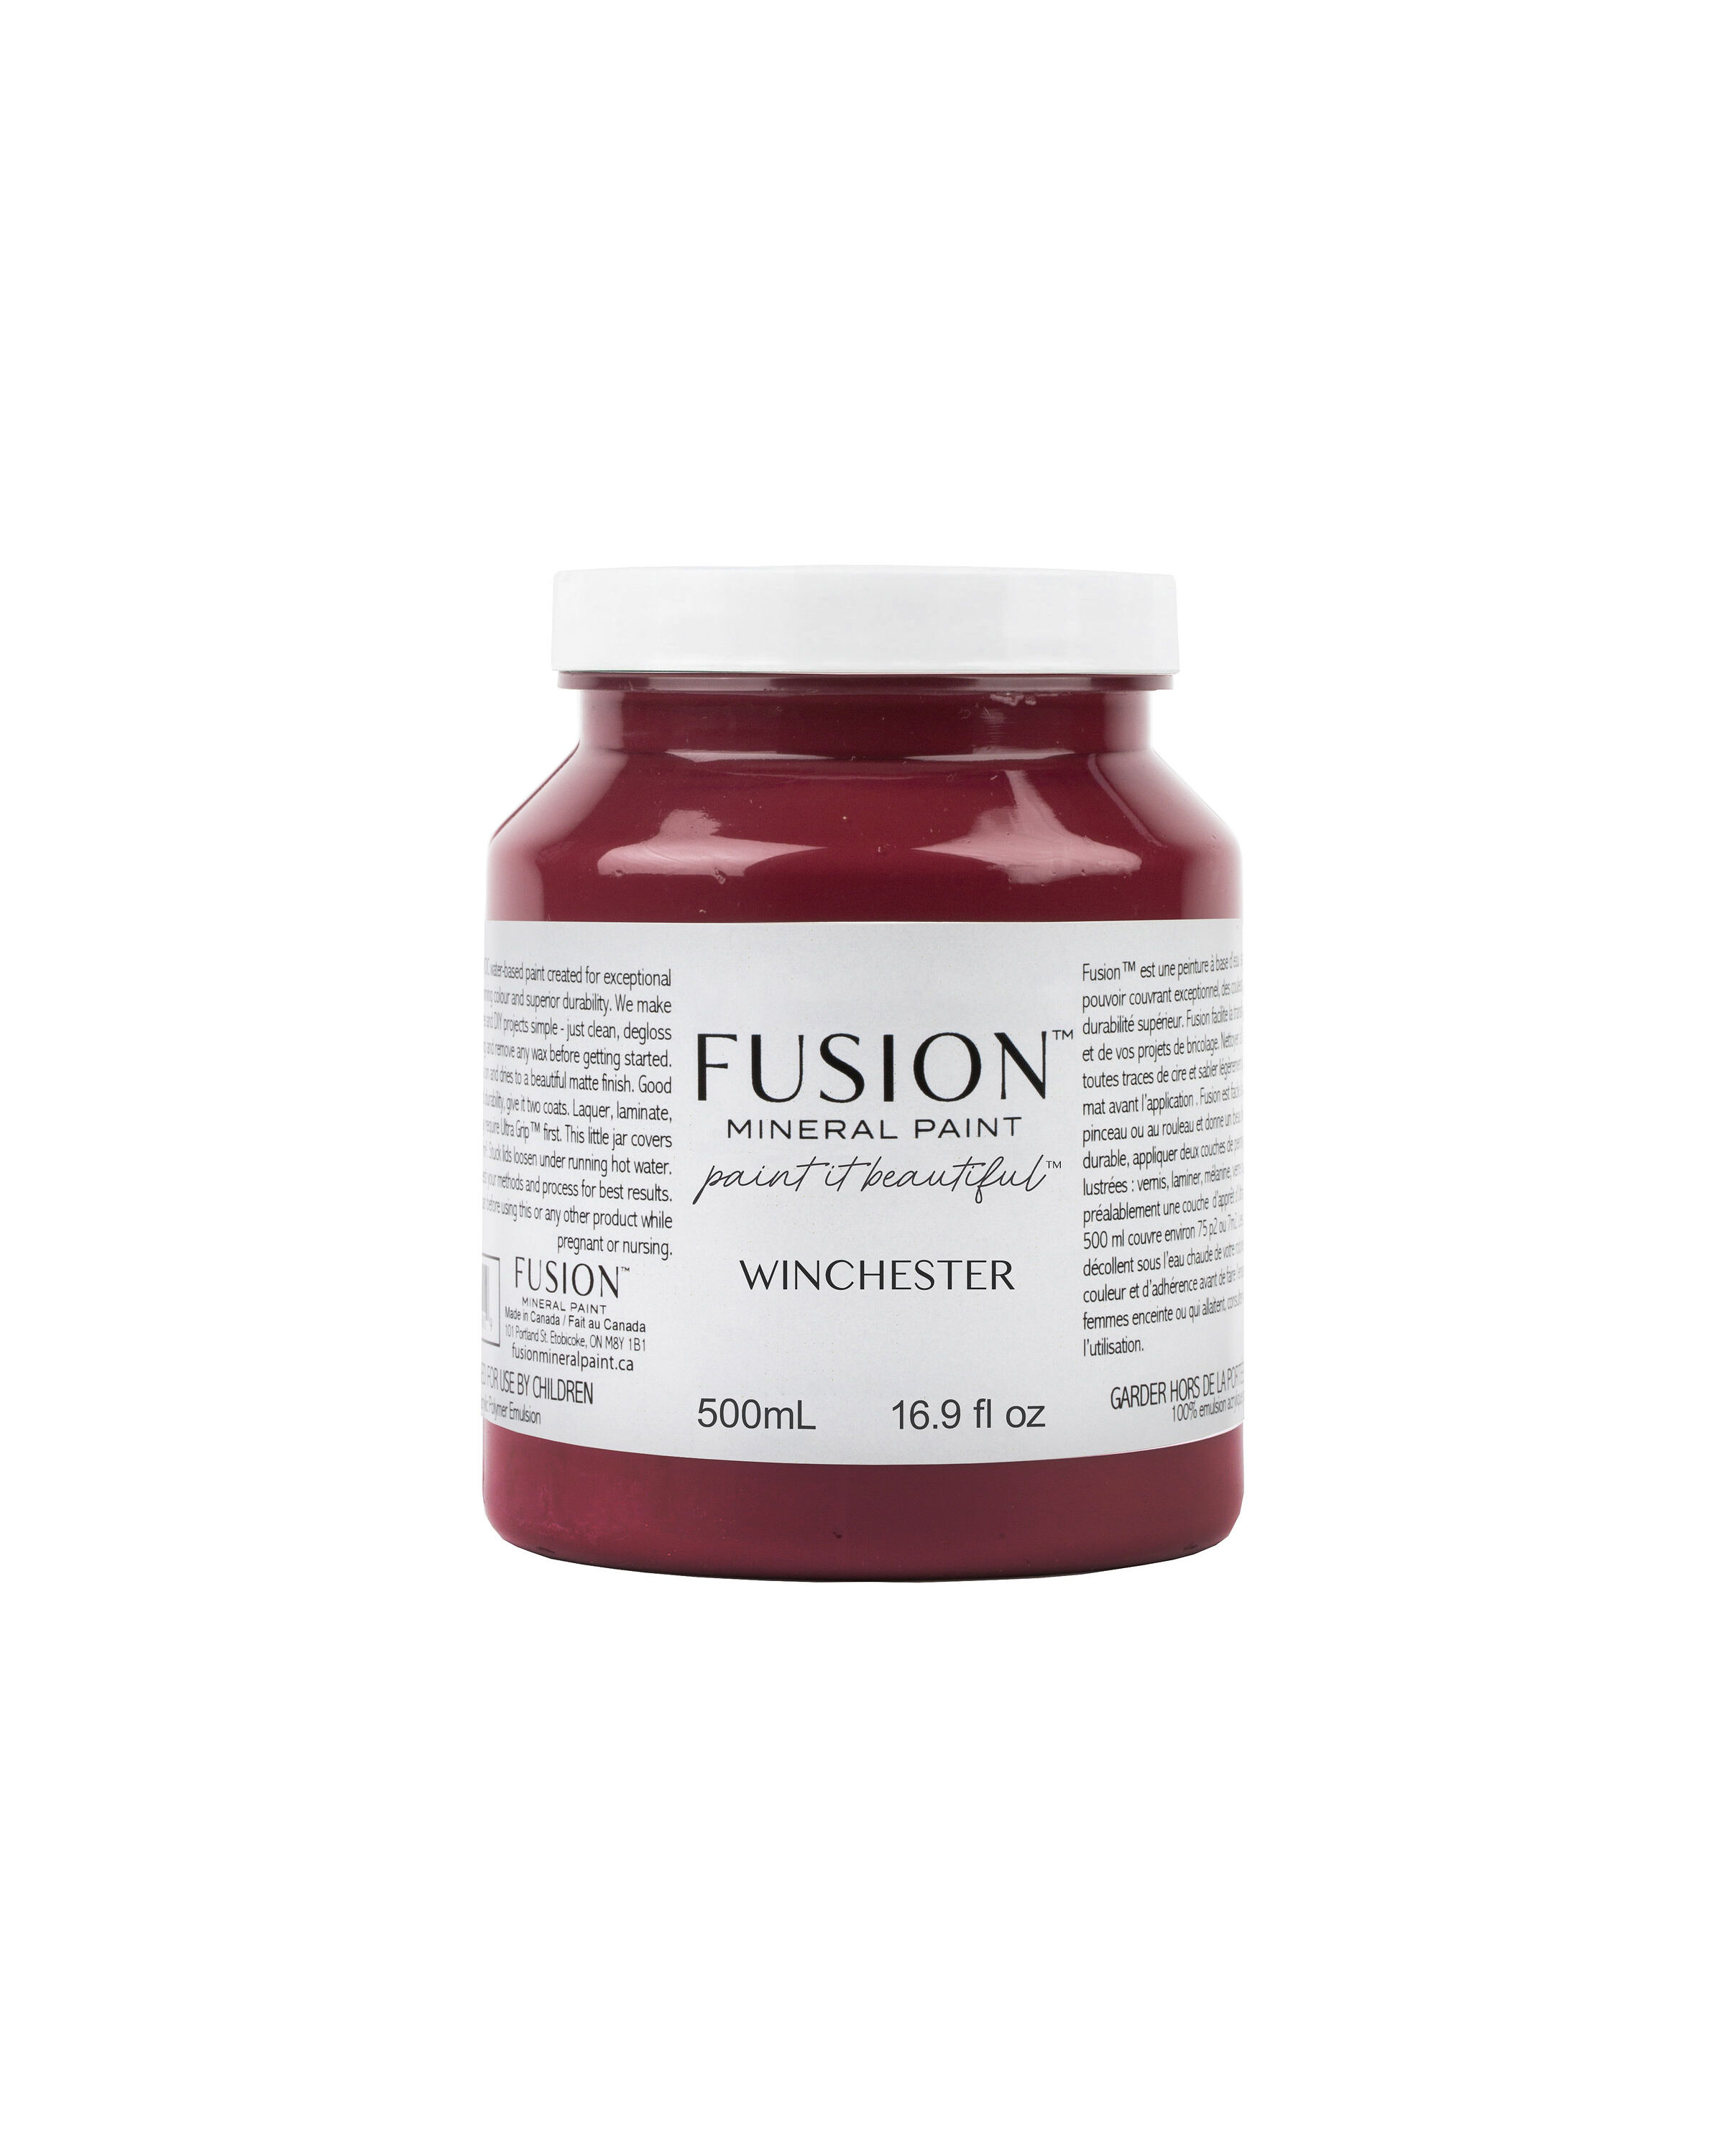 Fusion Mineral Paint vernice ecologica color rosso